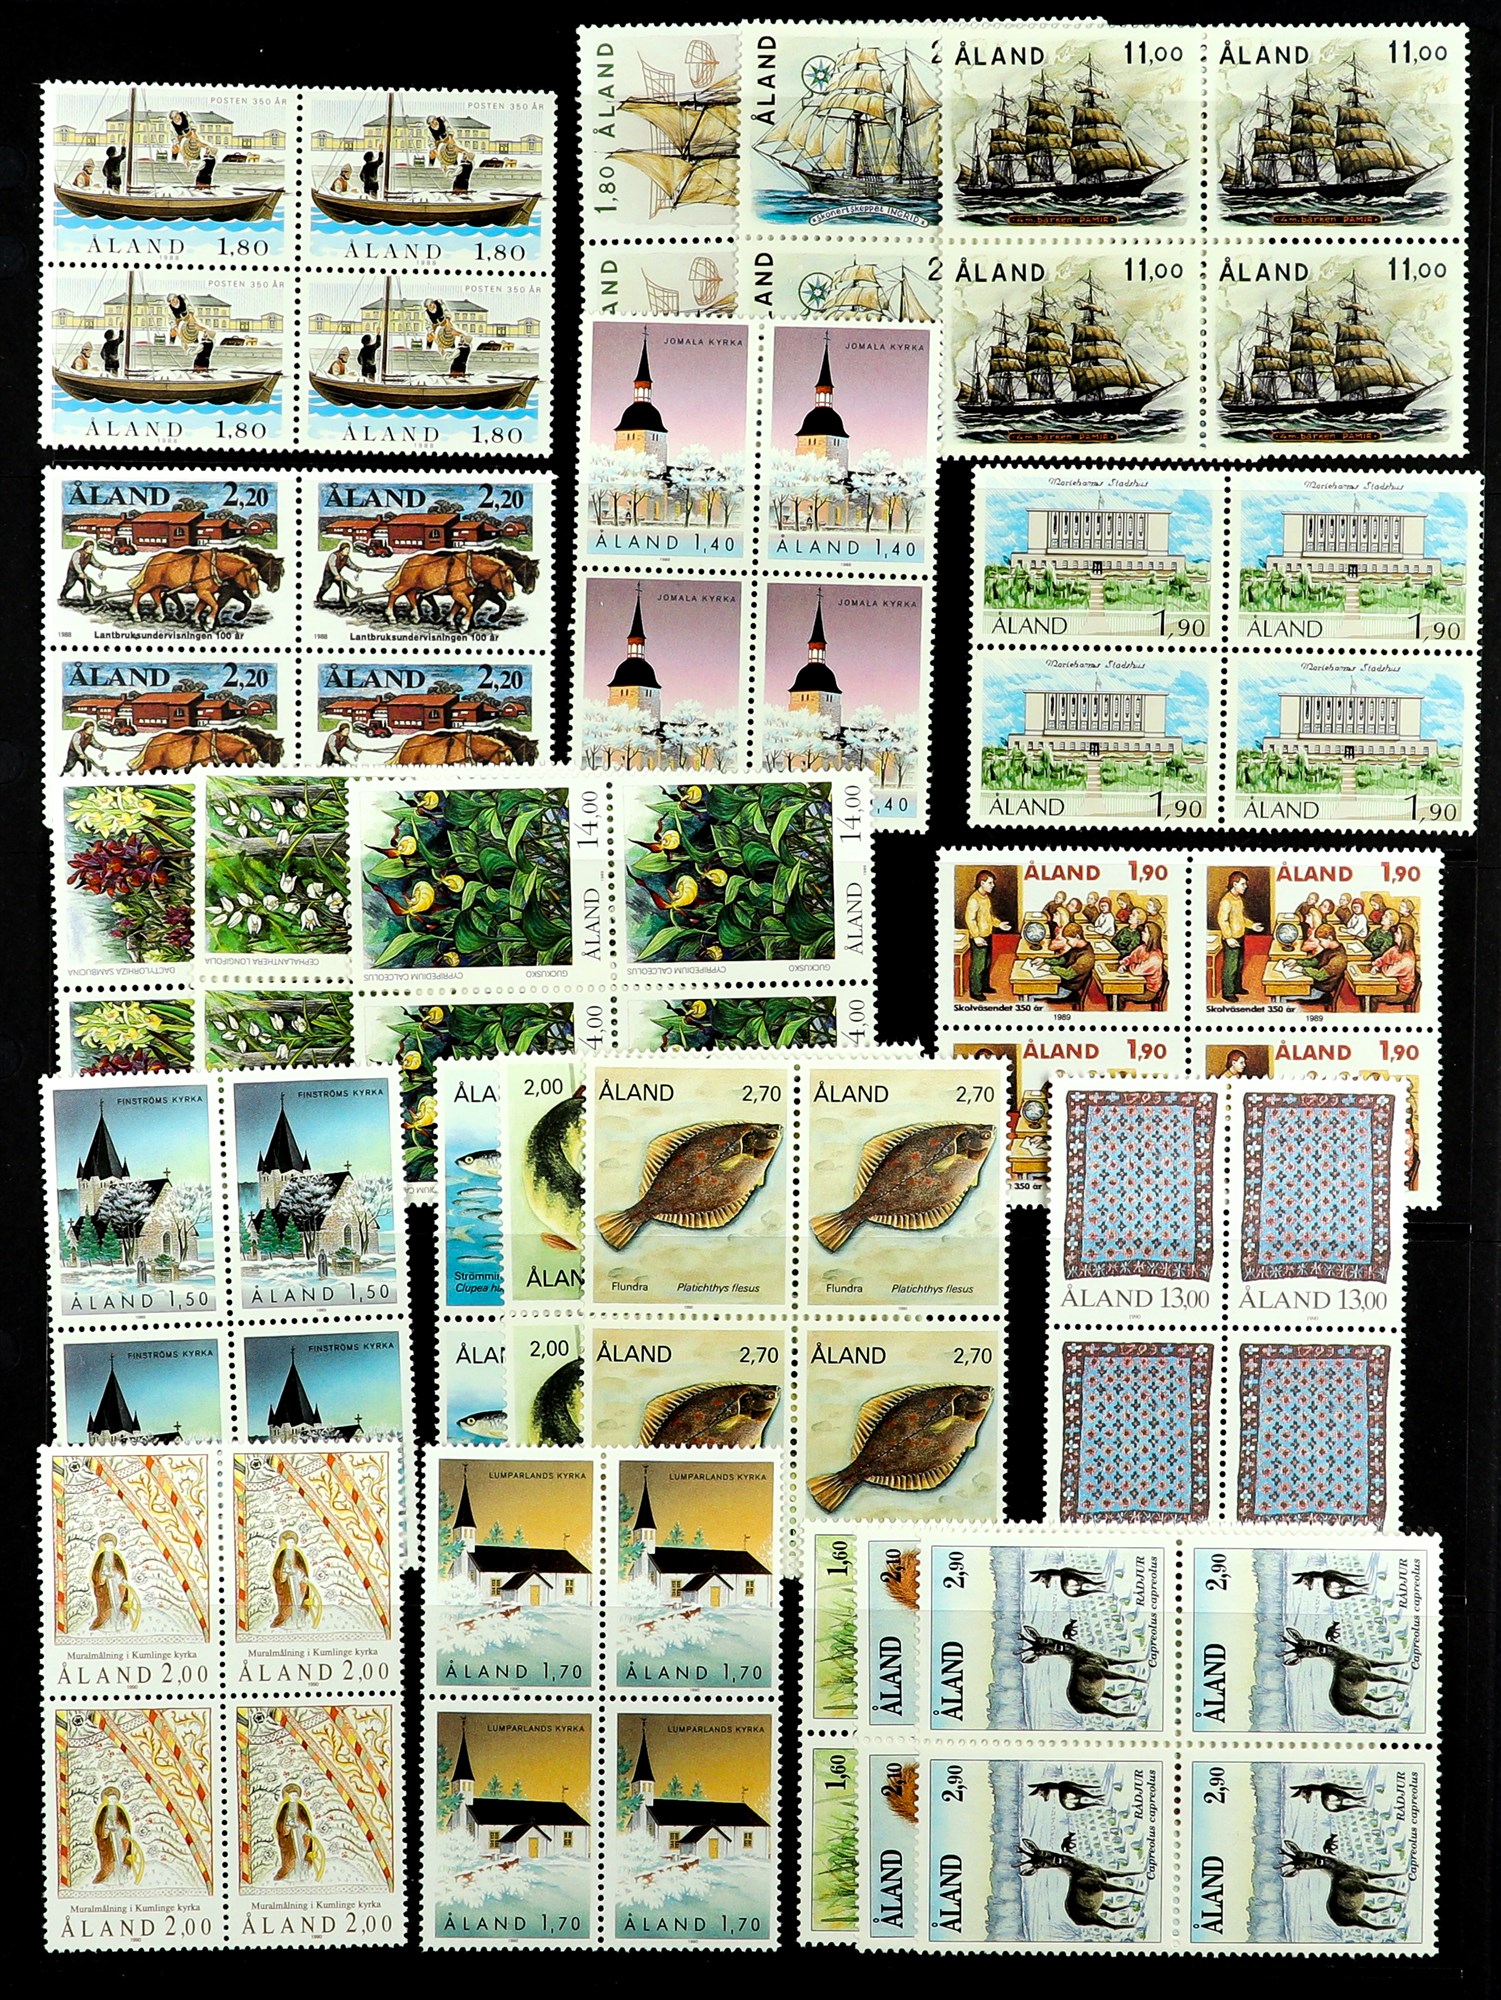 ALAND ISLANDS 1984 - 2001 COLLECTION complete for the period in never hinged mint blocks 4, also all - Image 2 of 12